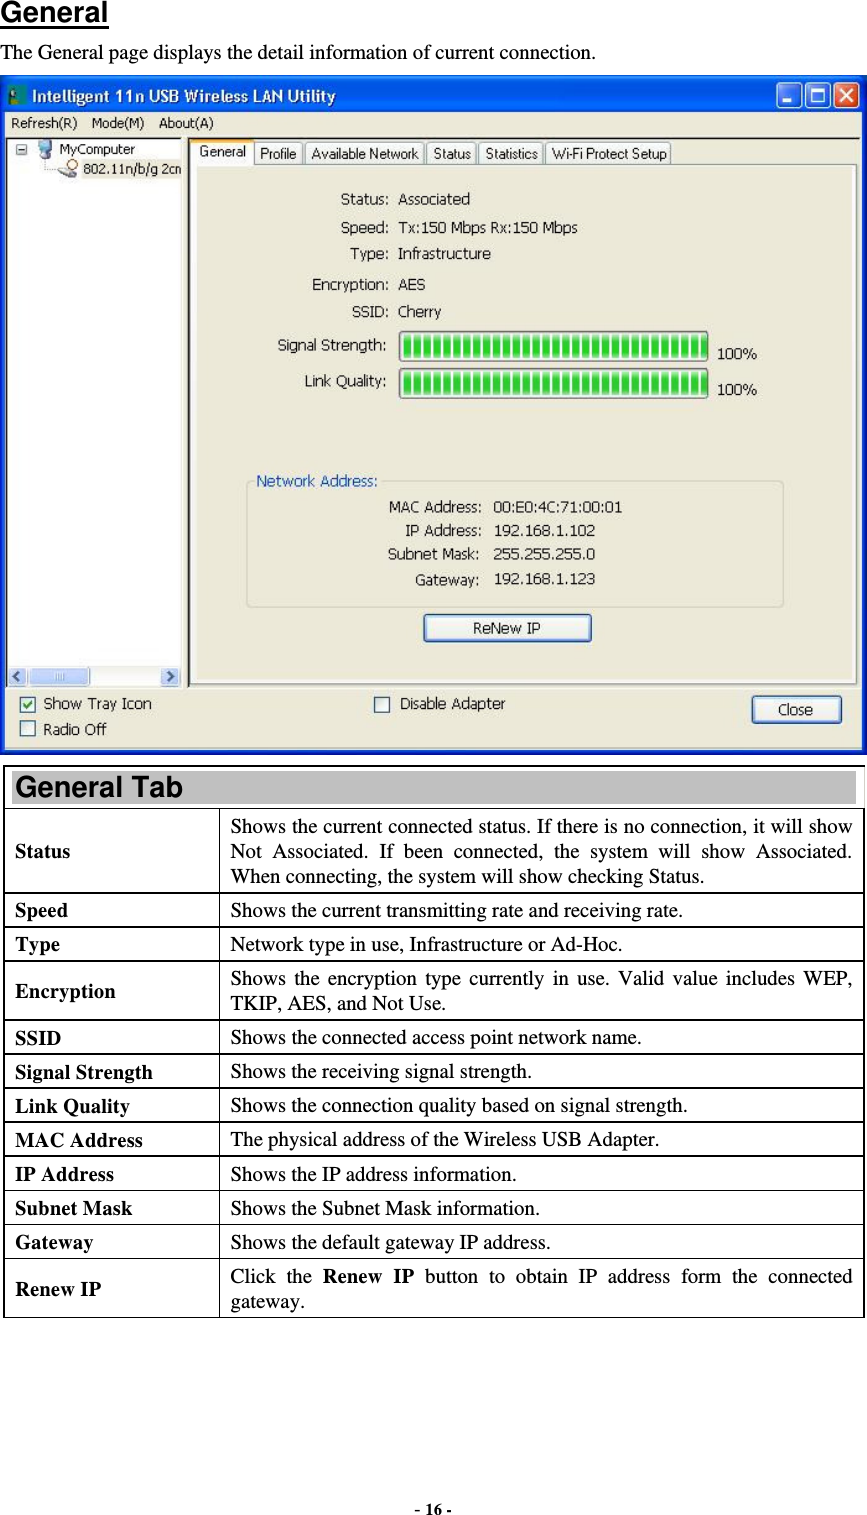  - 16 -  General The General page displays the detail information of current connection.  General Tab Status Shows the current connected status. If there is no connection, it will show Not Associated. If been connected, the system will show Associated. When connecting, the system will show checking Status. Speed  Shows the current transmitting rate and receiving rate. Type  Network type in use, Infrastructure or Ad-Hoc. Encryption  Shows the encryption type currently in use. Valid value includes WEP, TKIP, AES, and Not Use. SSID  Shows the connected access point network name. Signal Strength  Shows the receiving signal strength. Link Quality  Shows the connection quality based on signal strength. MAC Address  The physical address of the Wireless USB Adapter. IP Address  Shows the IP address information. Subnet Mask  Shows the Subnet Mask information. Gateway  Shows the default gateway IP address. Renew IP  Click the Renew IP button to obtain IP address form the connected gateway. 